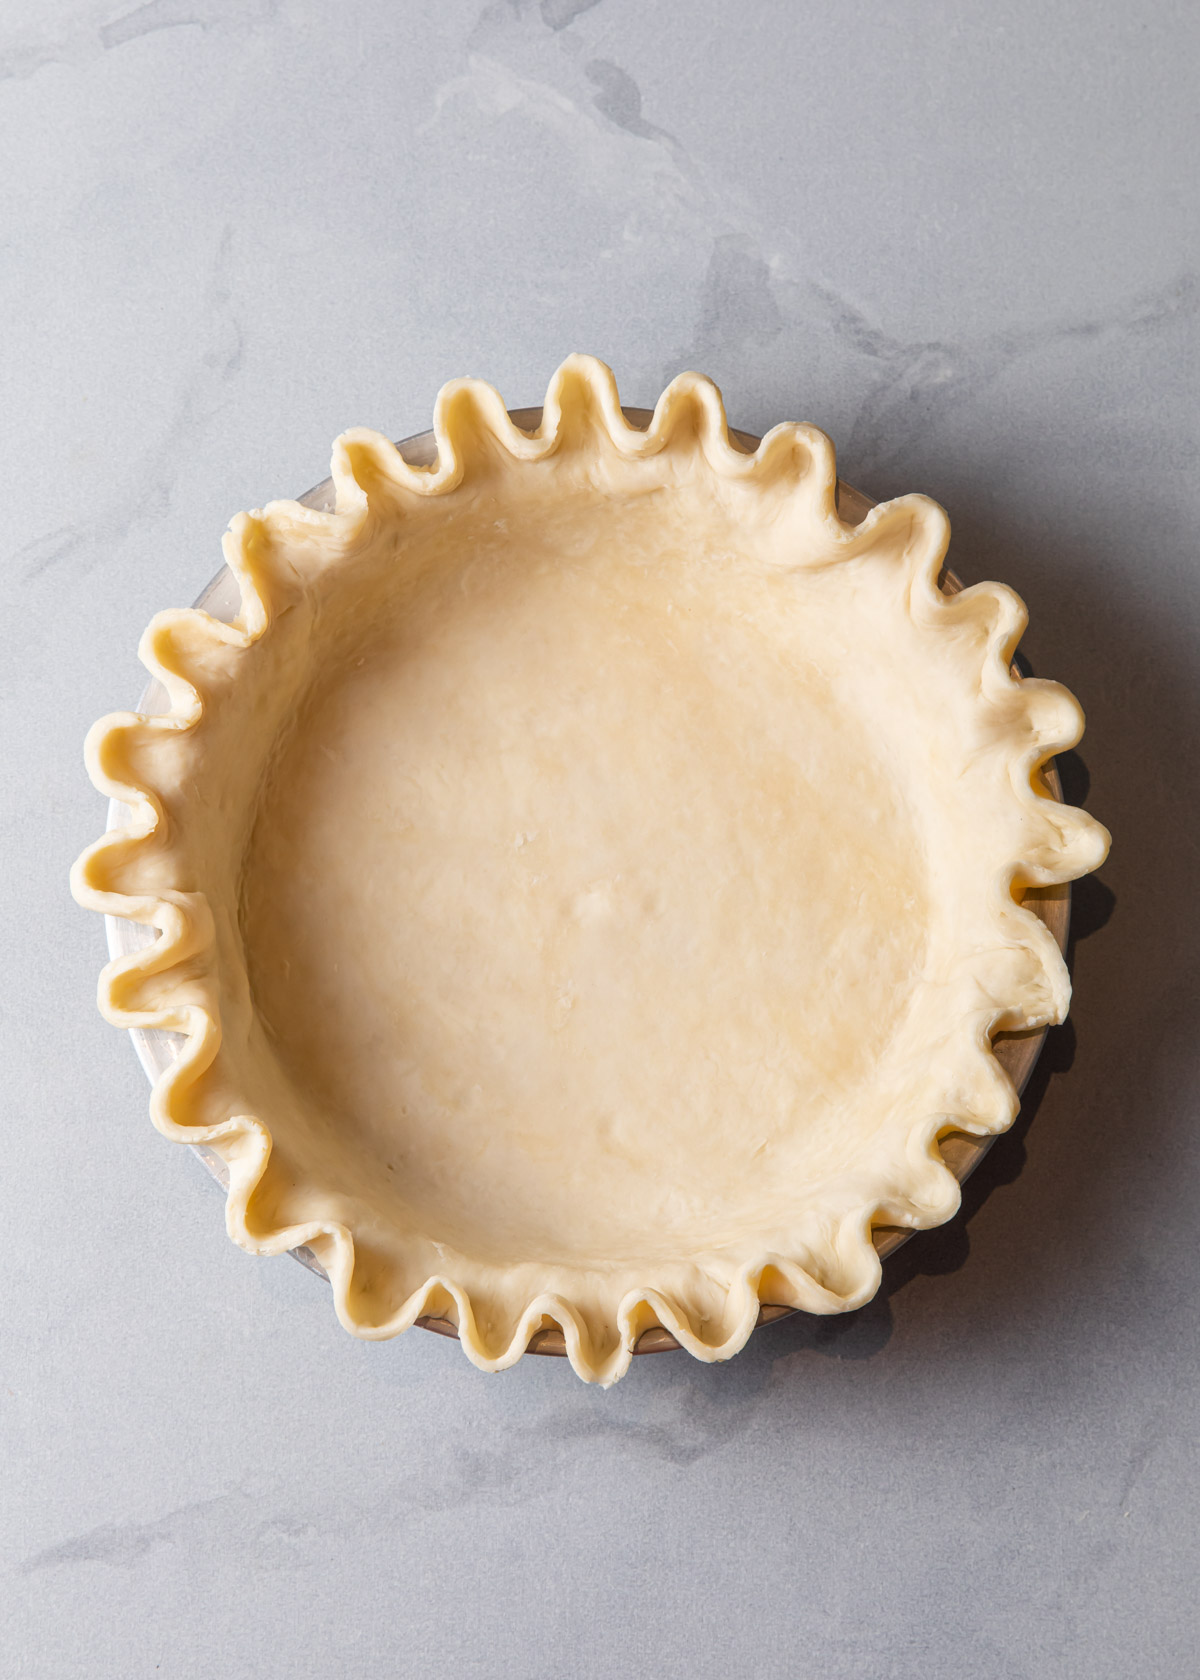 A crimped pie shell before baking.